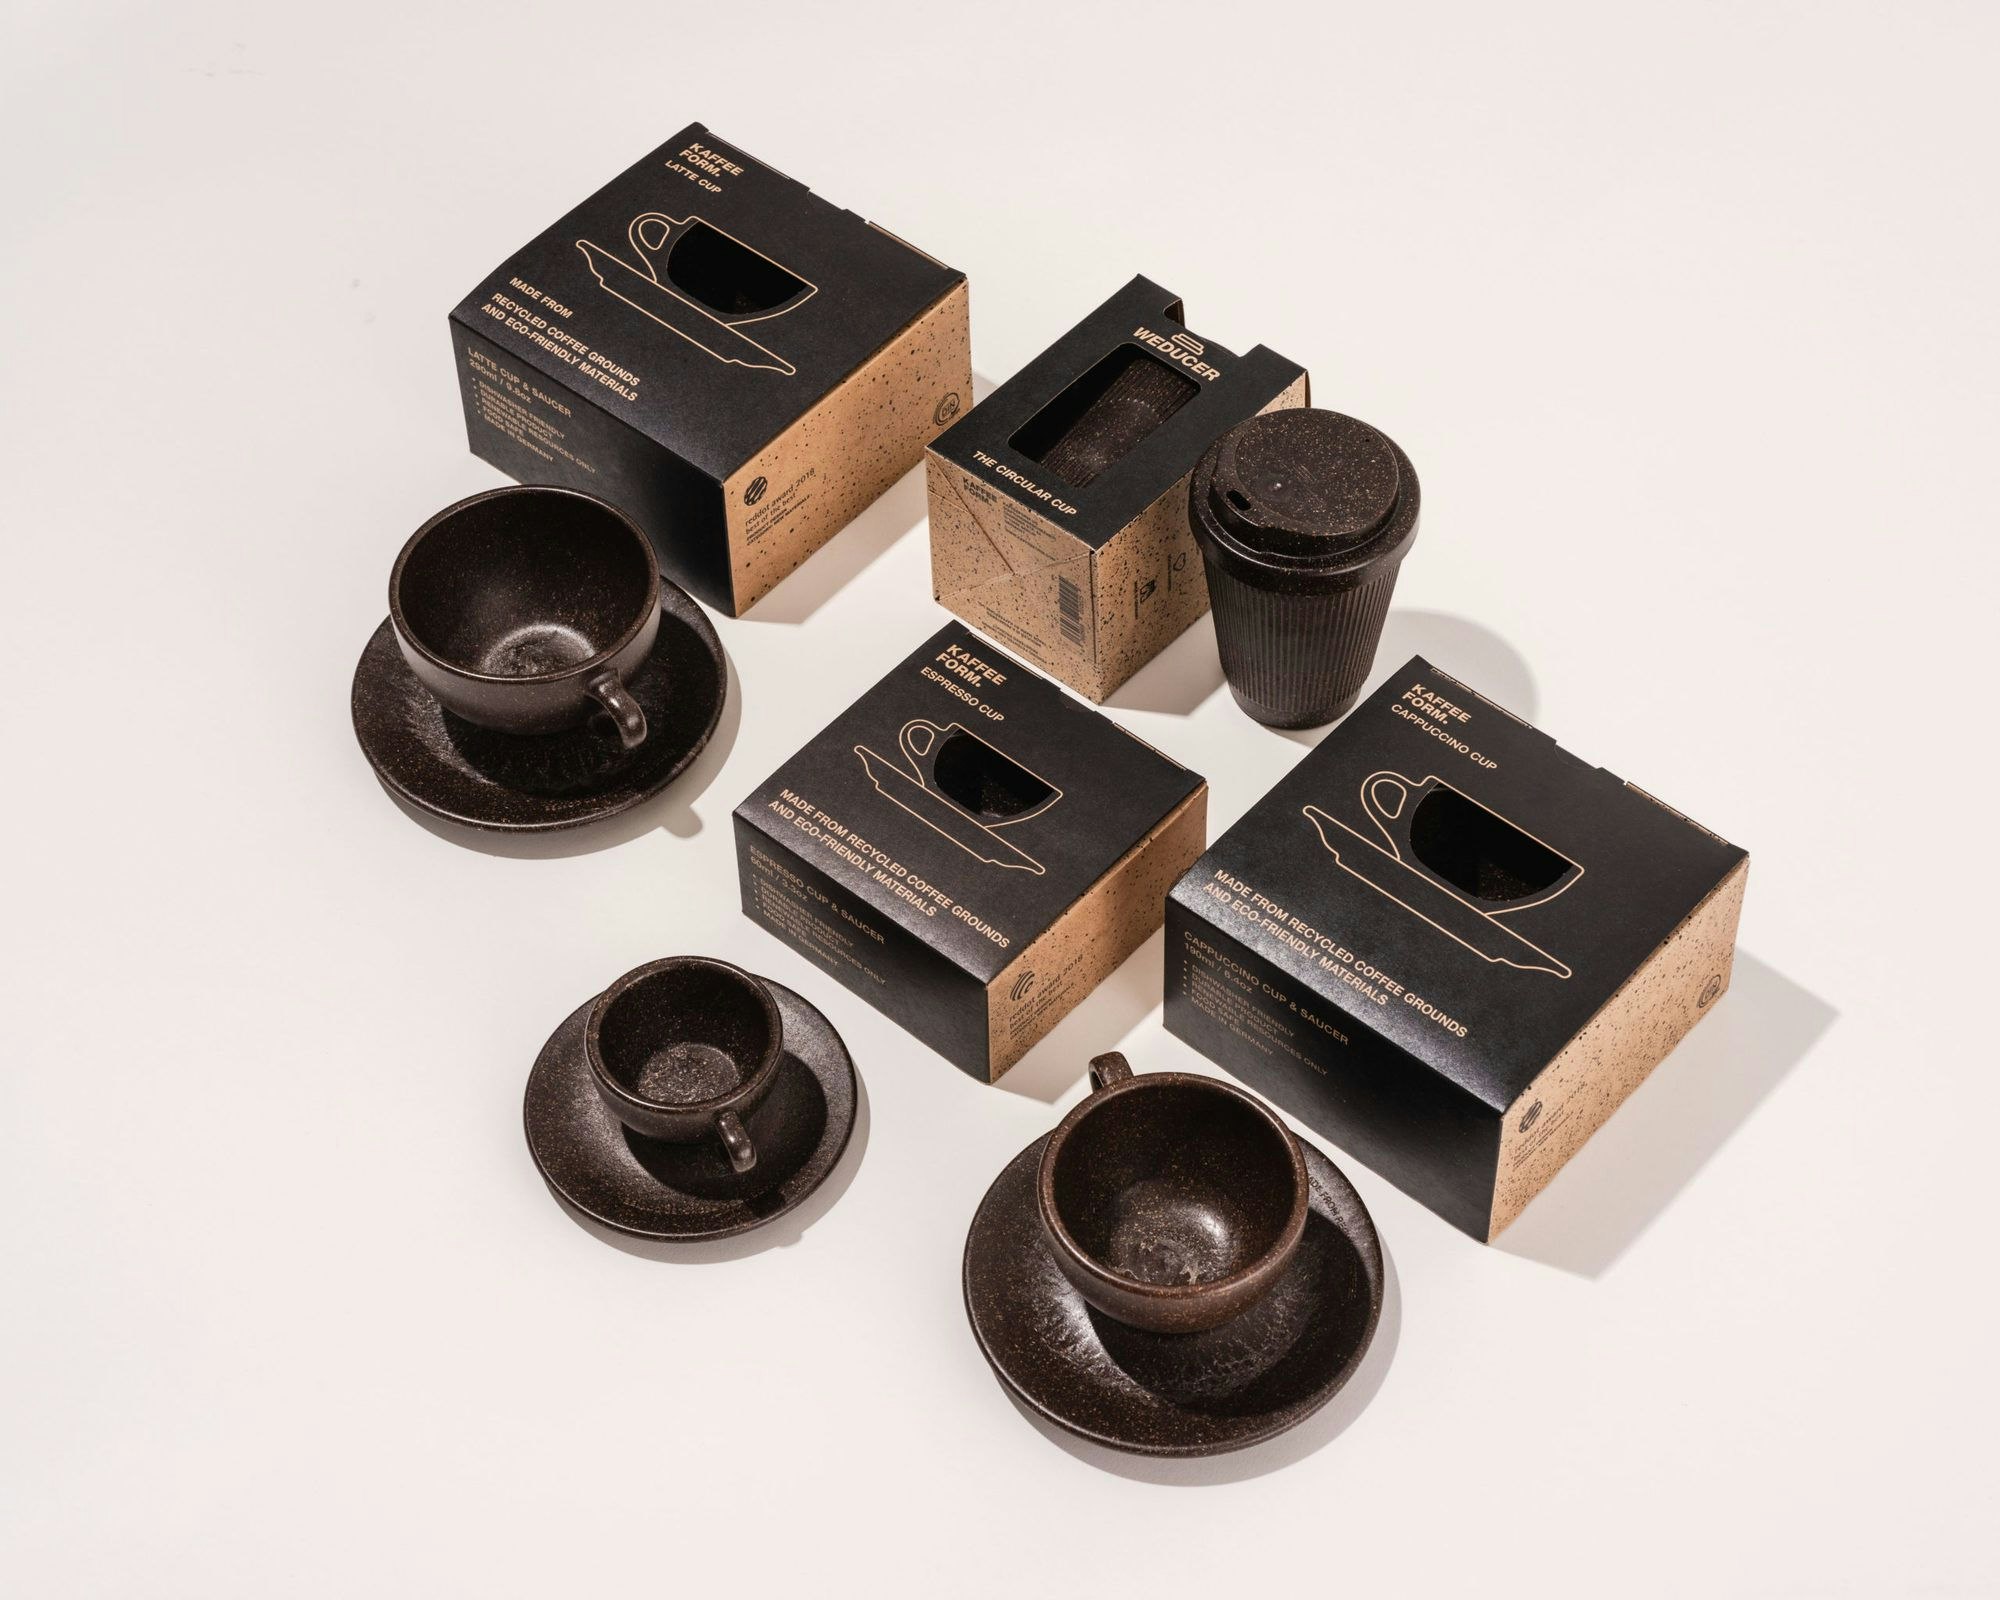 Kaffeeform - Cups from recycled coffee grounds